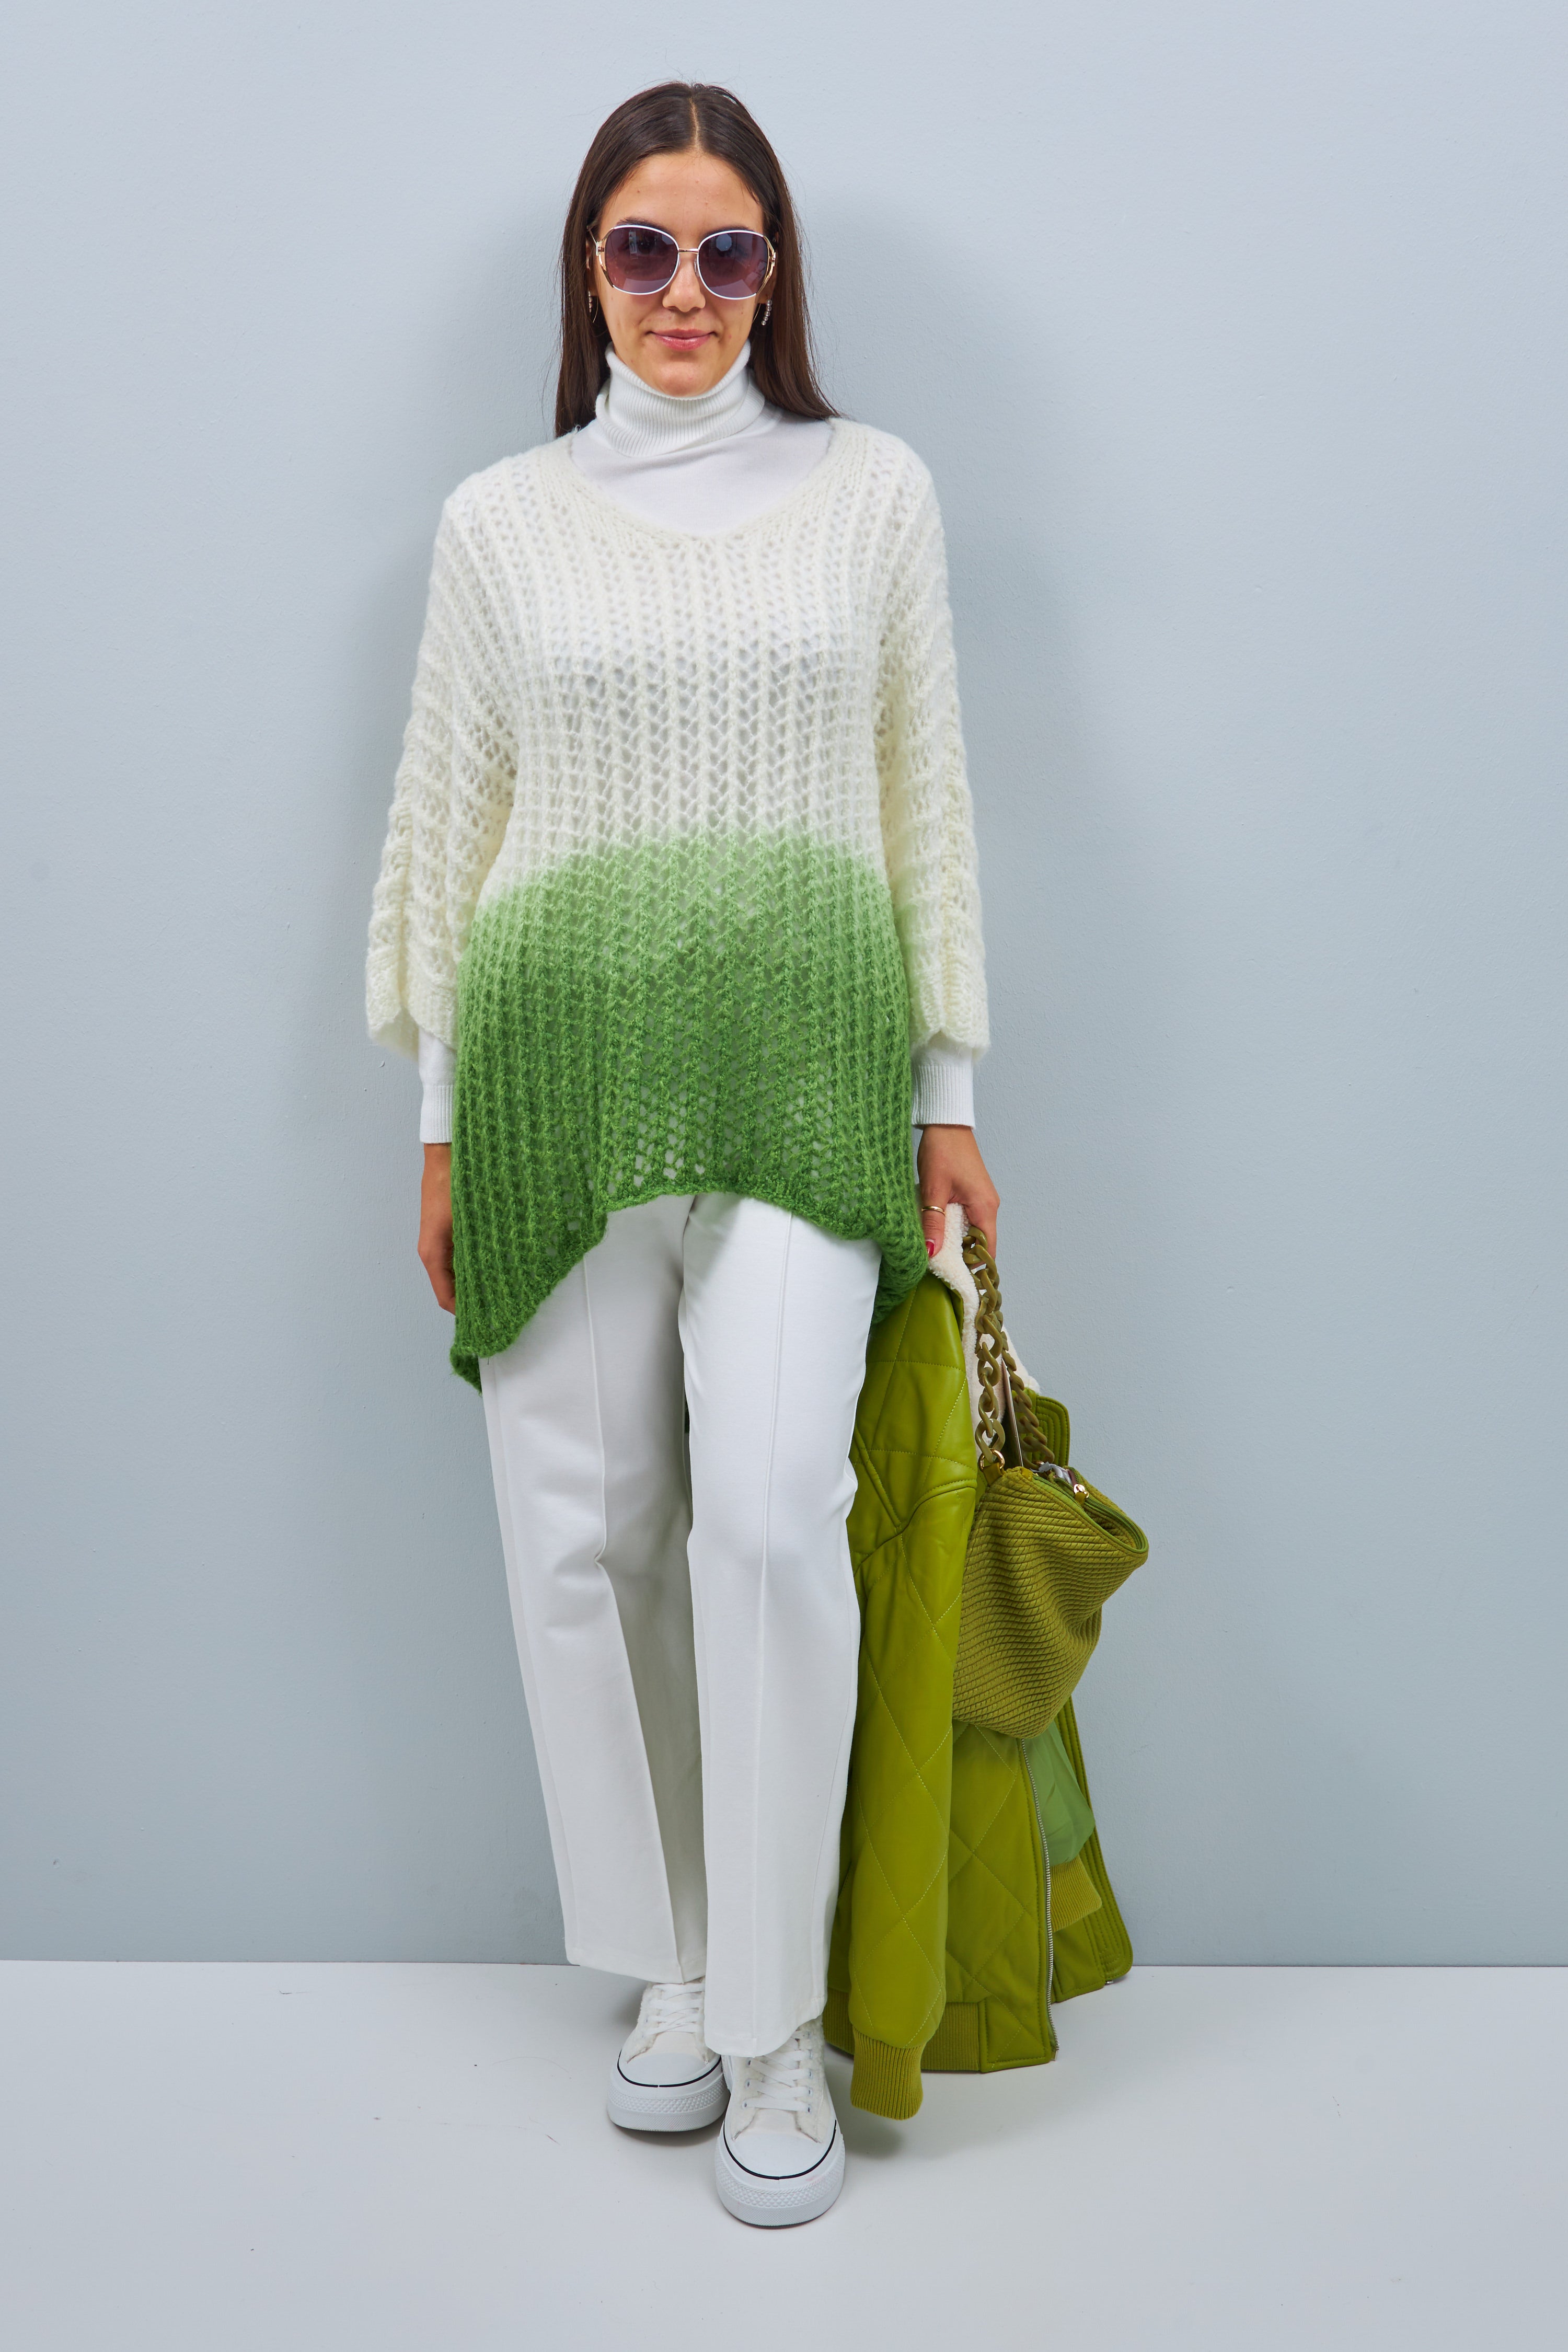 Knit sweater with color gradient, offwhite-green